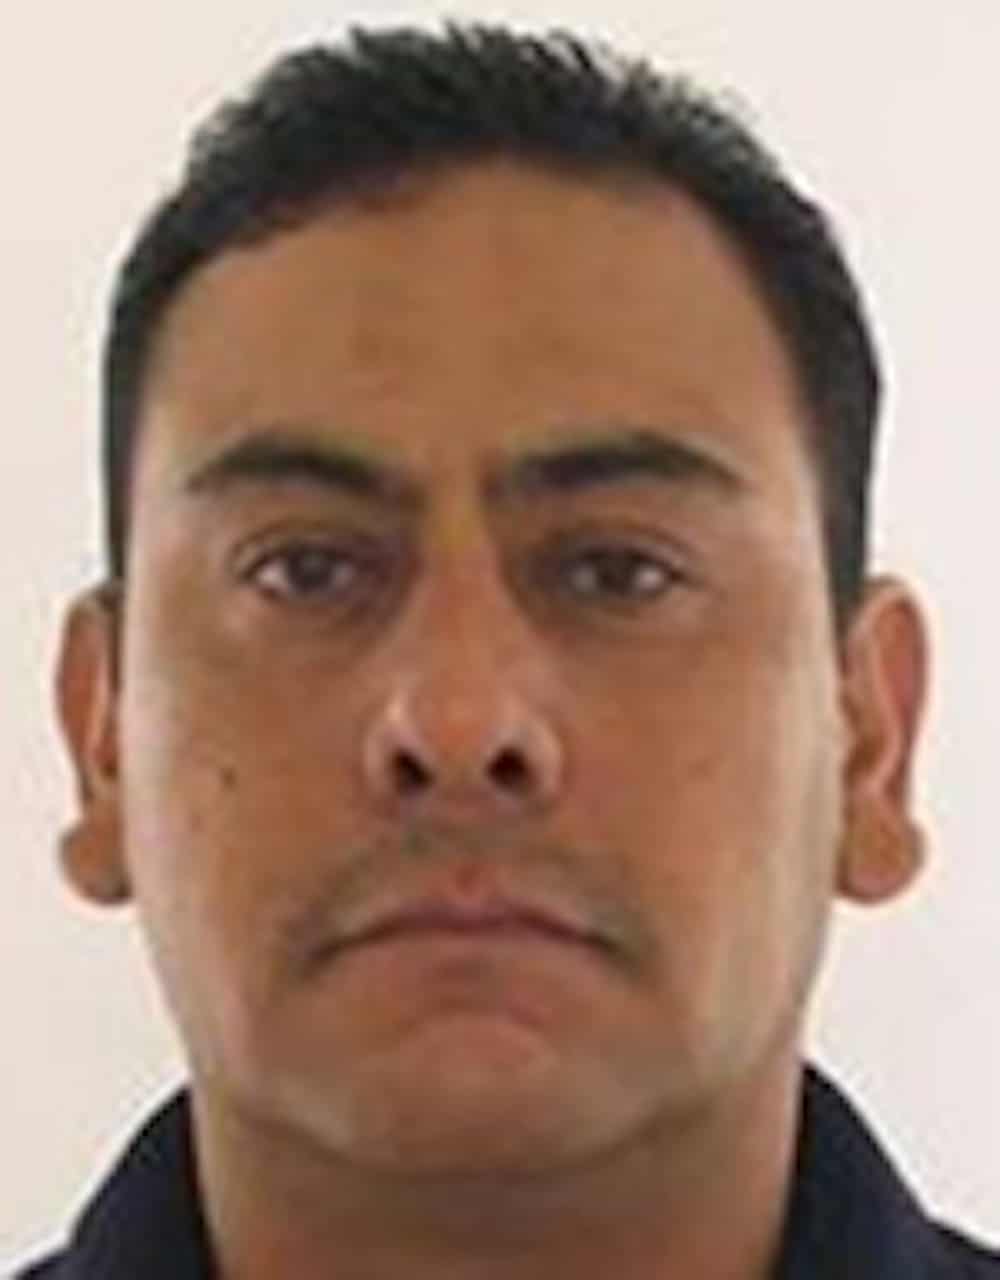 Alleged Member of Sinaloa Cartel Extradited on Drug Trafficking Charges